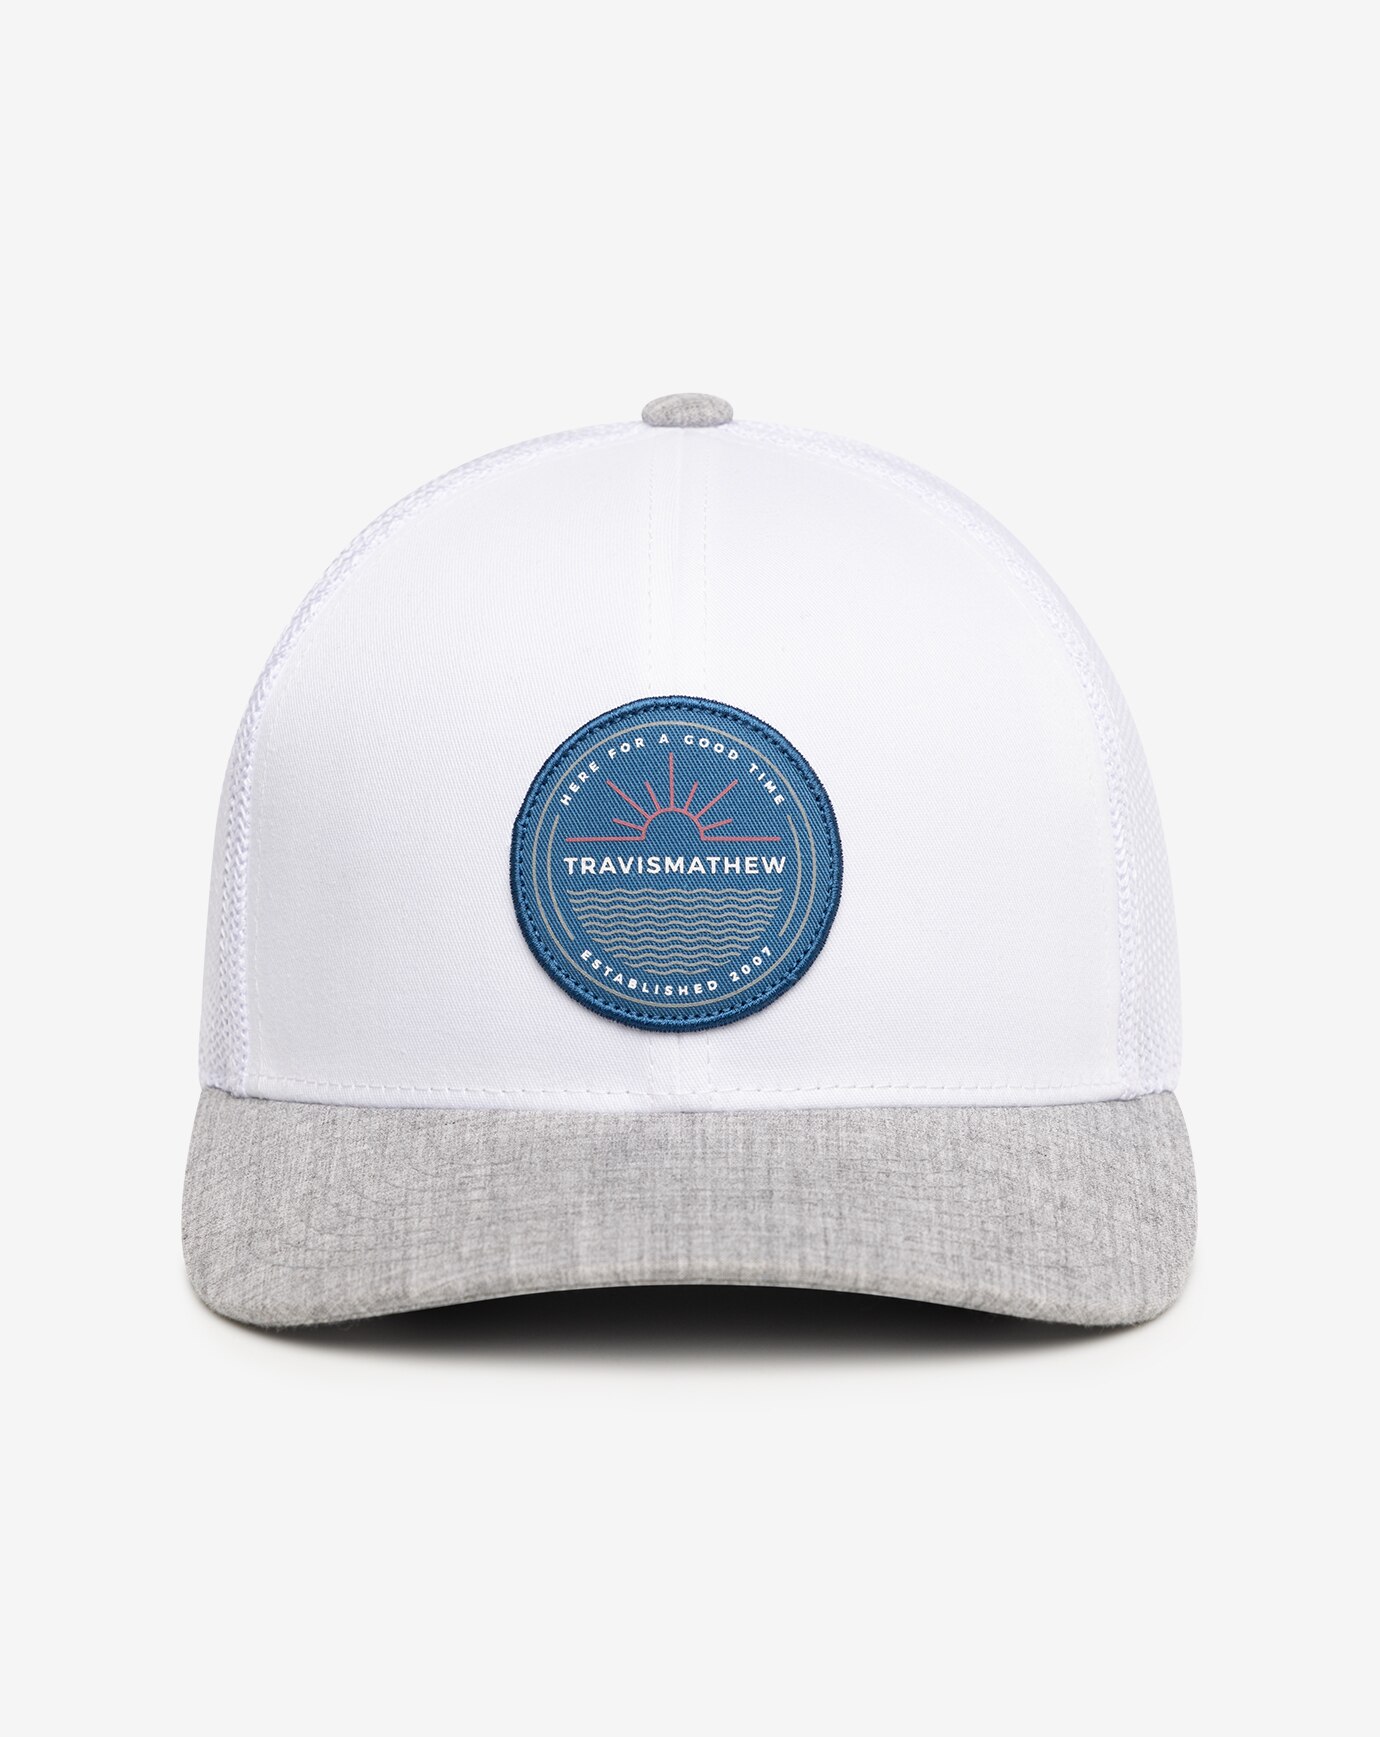 ALL BOOKED UP SNAPBACK HAT Image 1